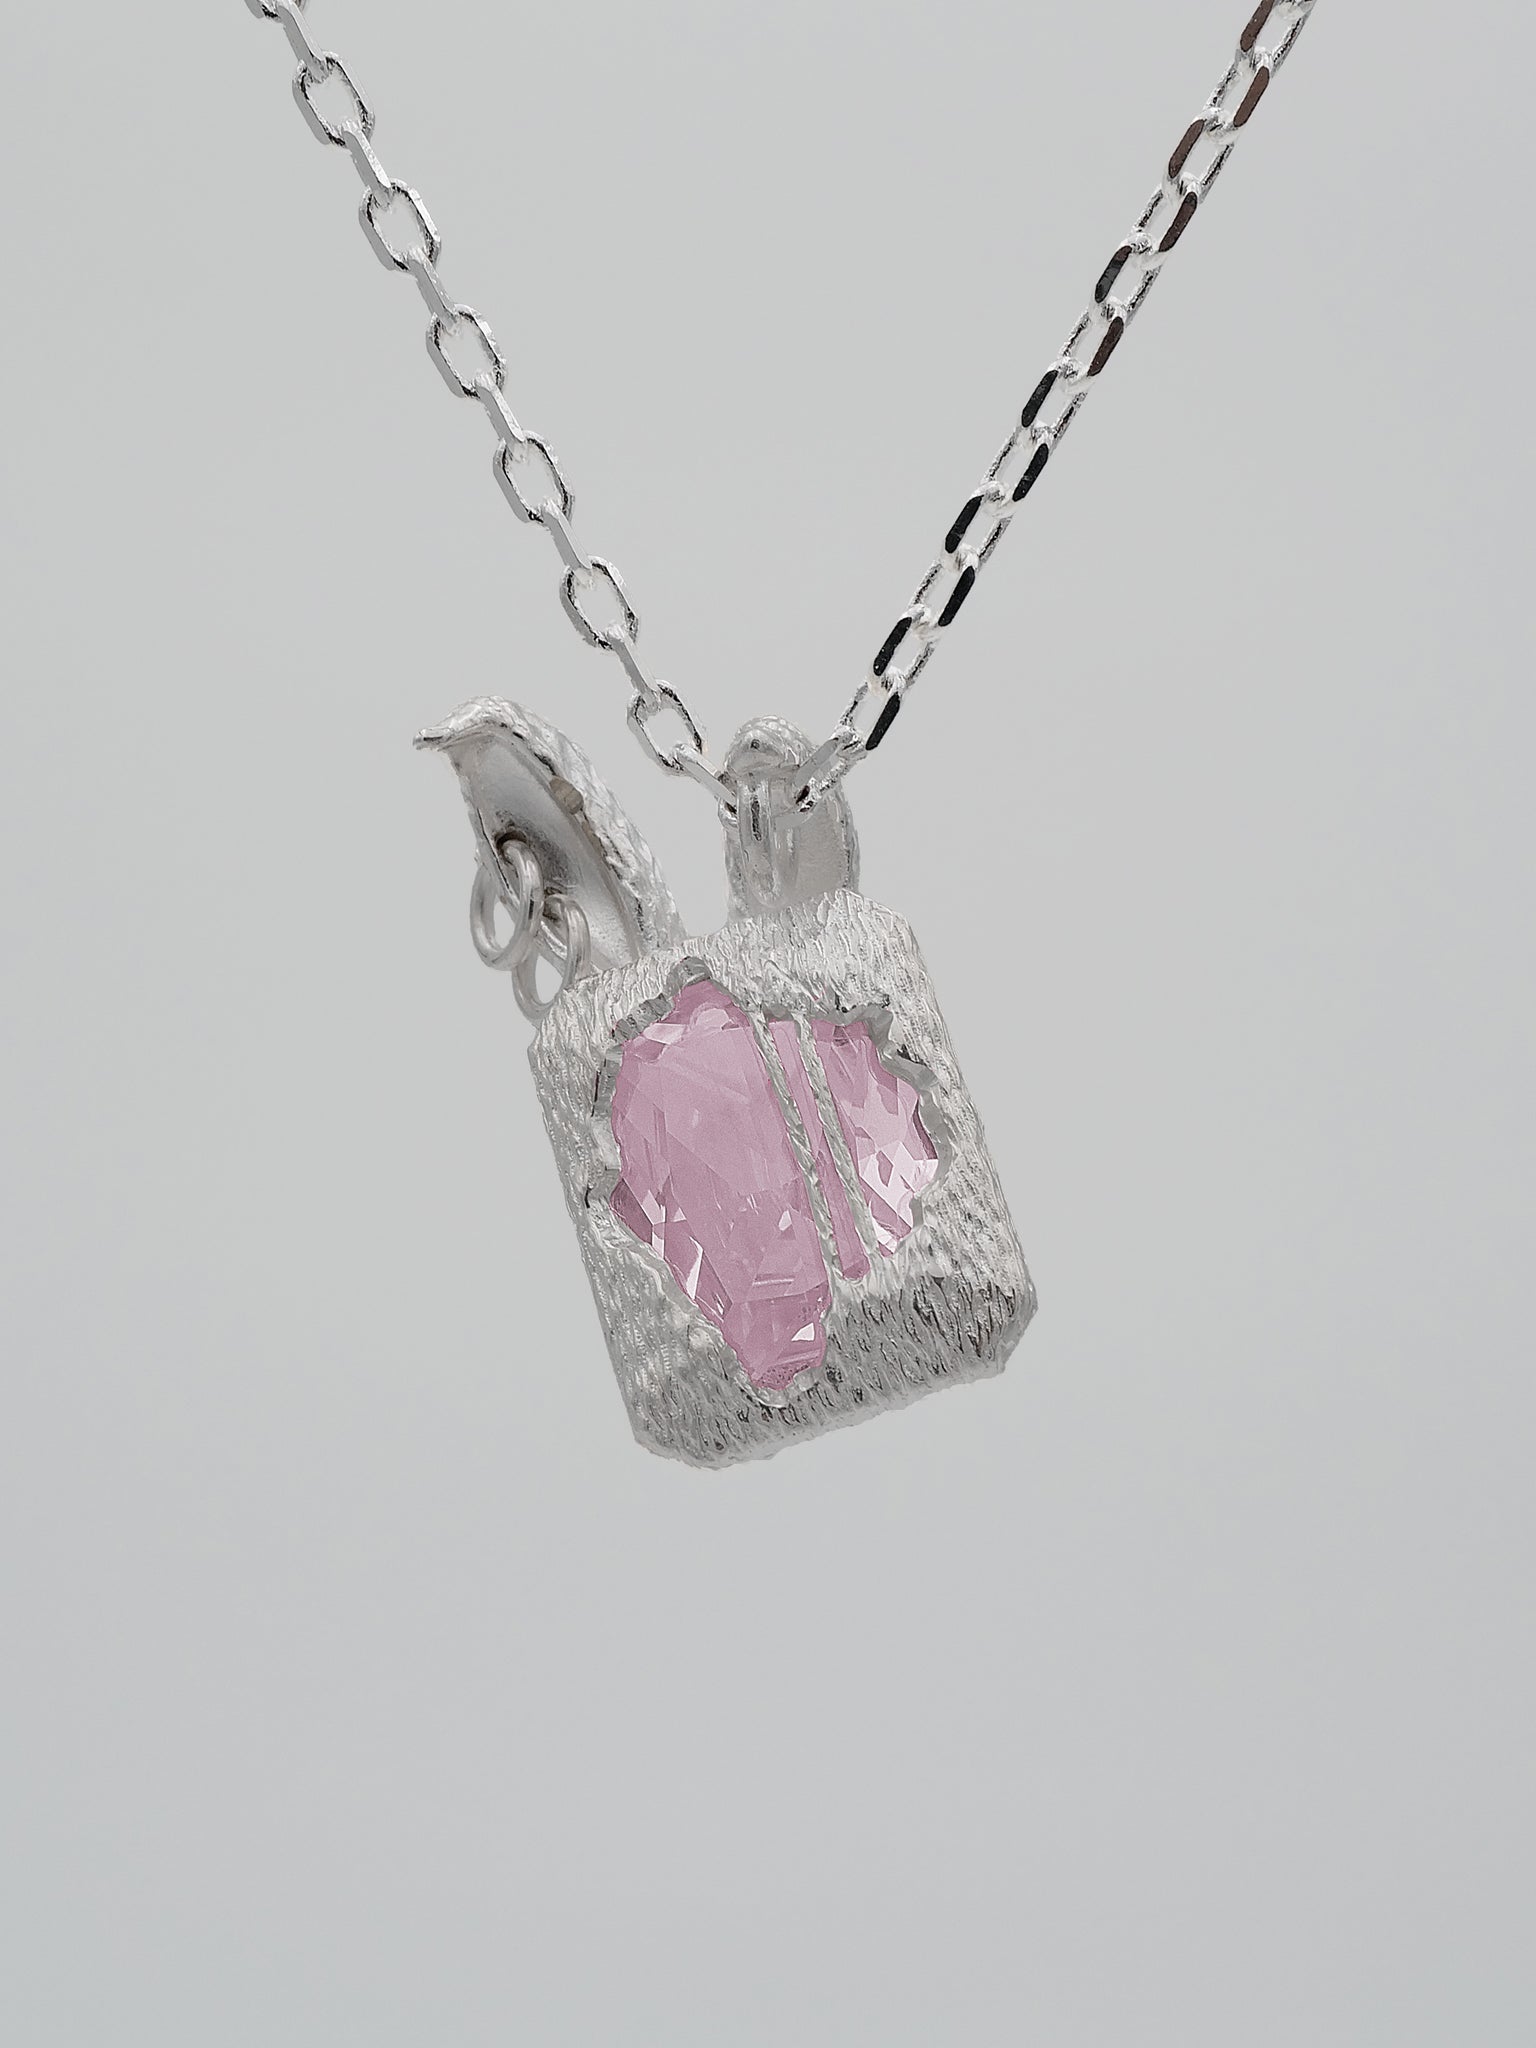 SILVER METAL ZONG NECKLACE - WILD HARE EDITION (PINK STONE)